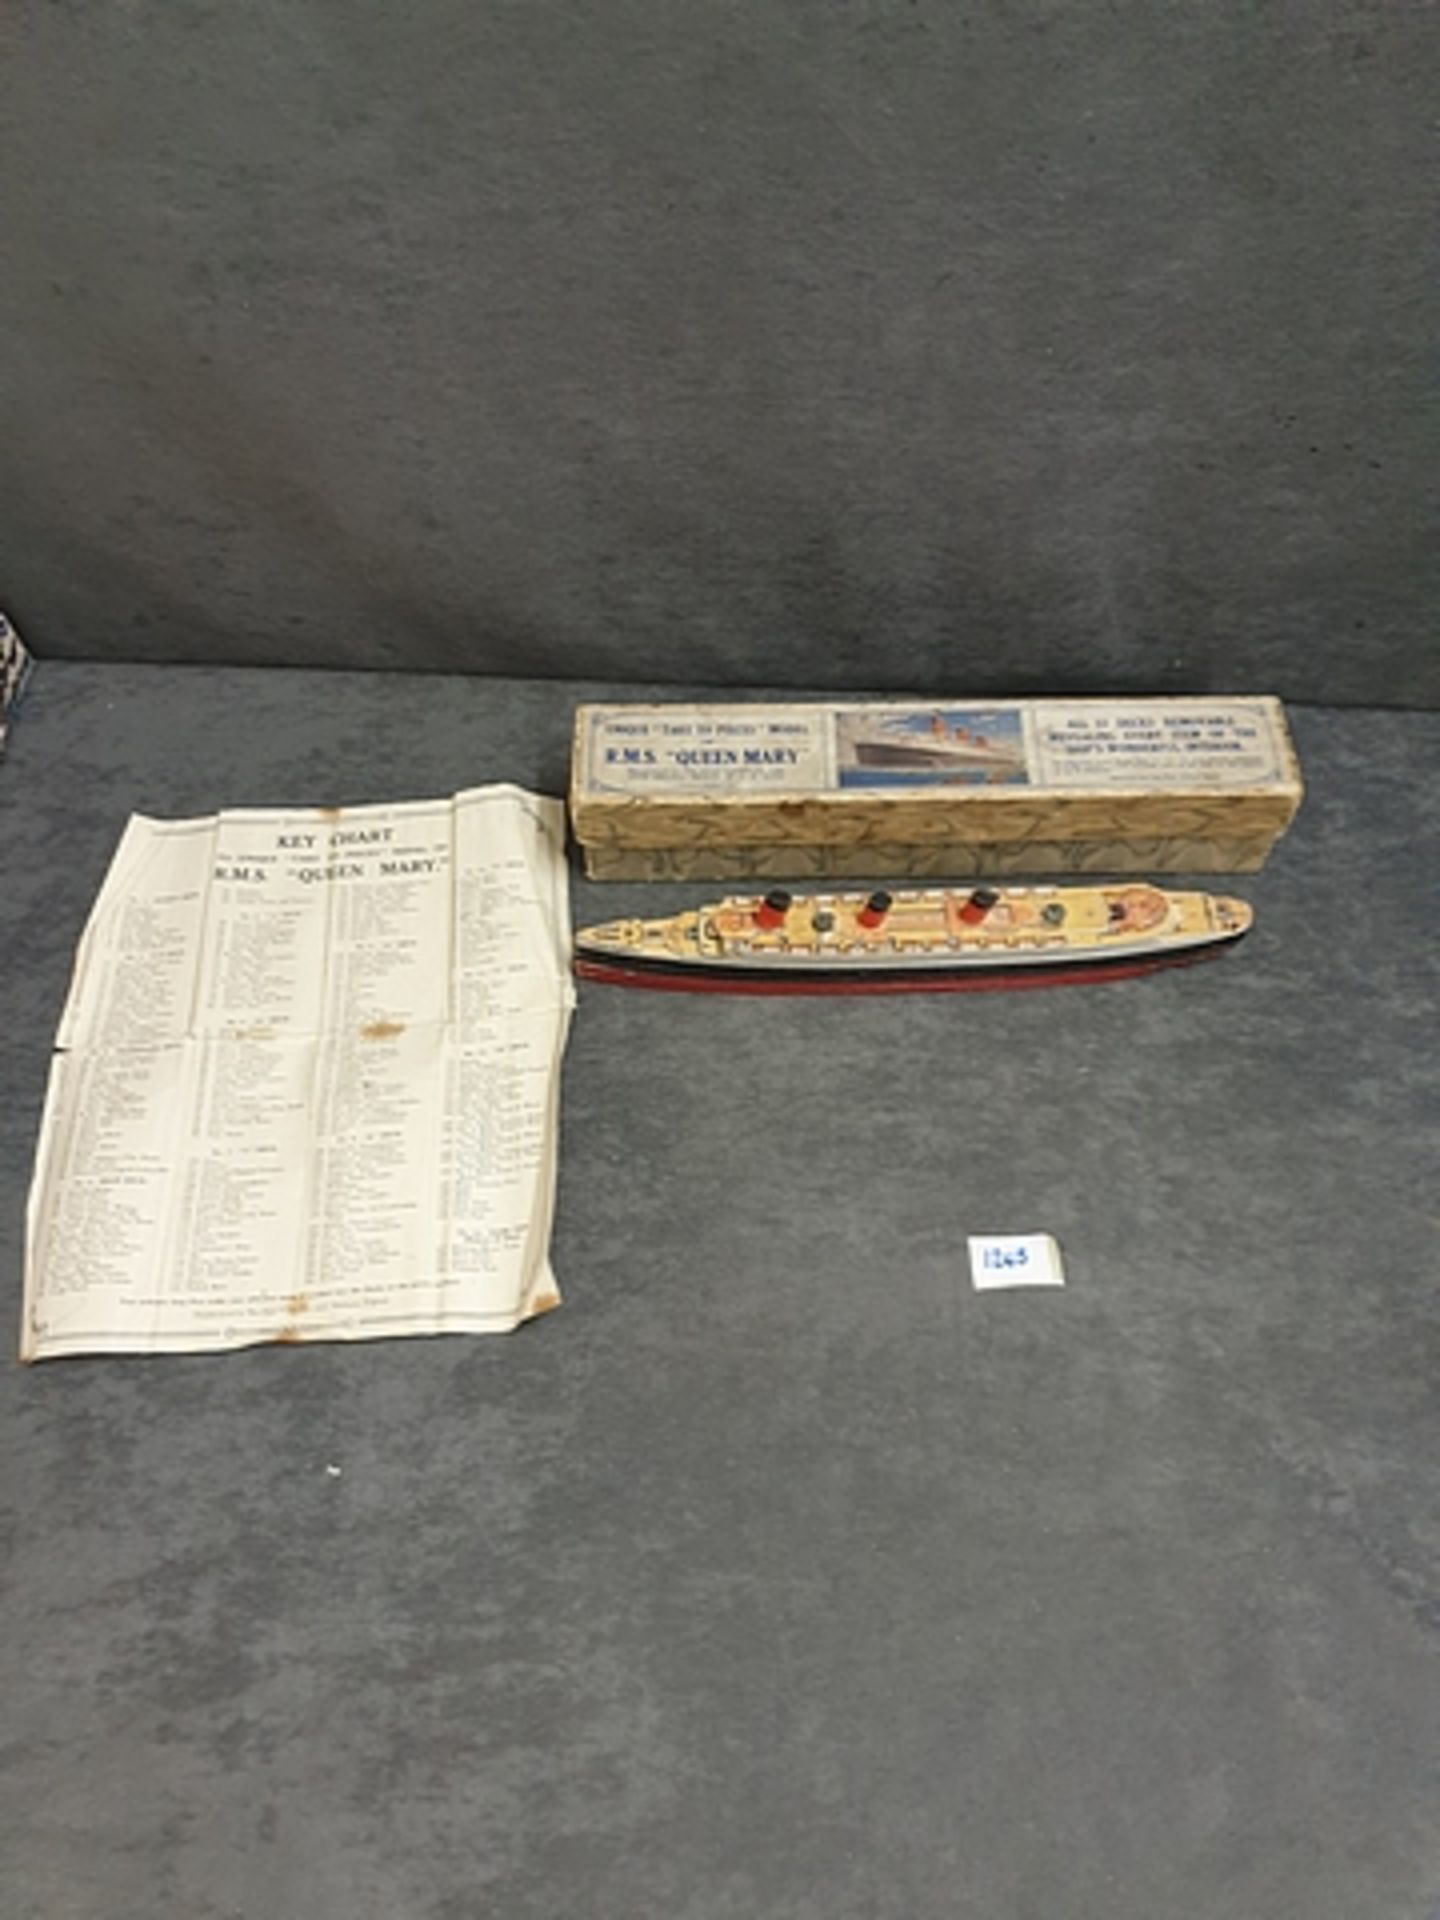 Chad Valley Co Ltd Unique Take To Pieces Model Of RMS Queen Mary Boxed With Paperworkin Original - Image 2 of 3